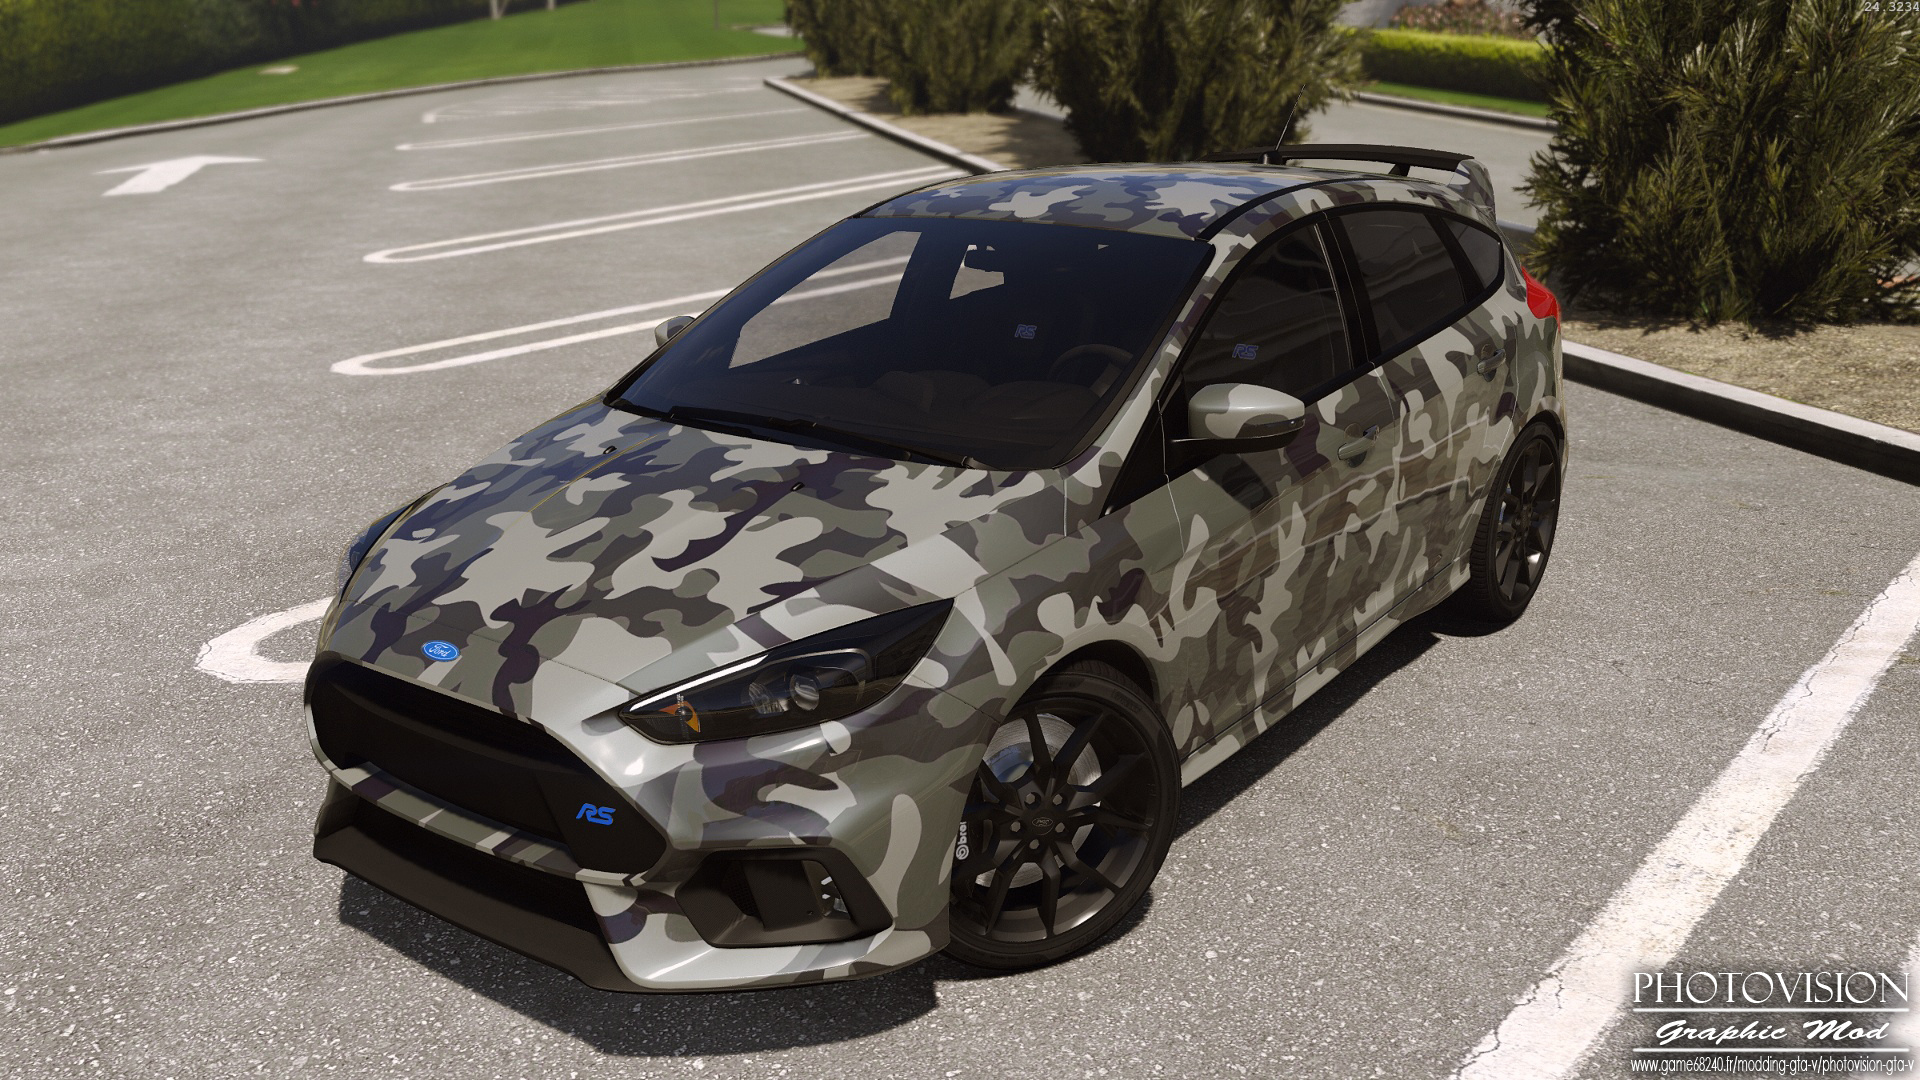 Ford Focus RS Power Modifications and Tuning